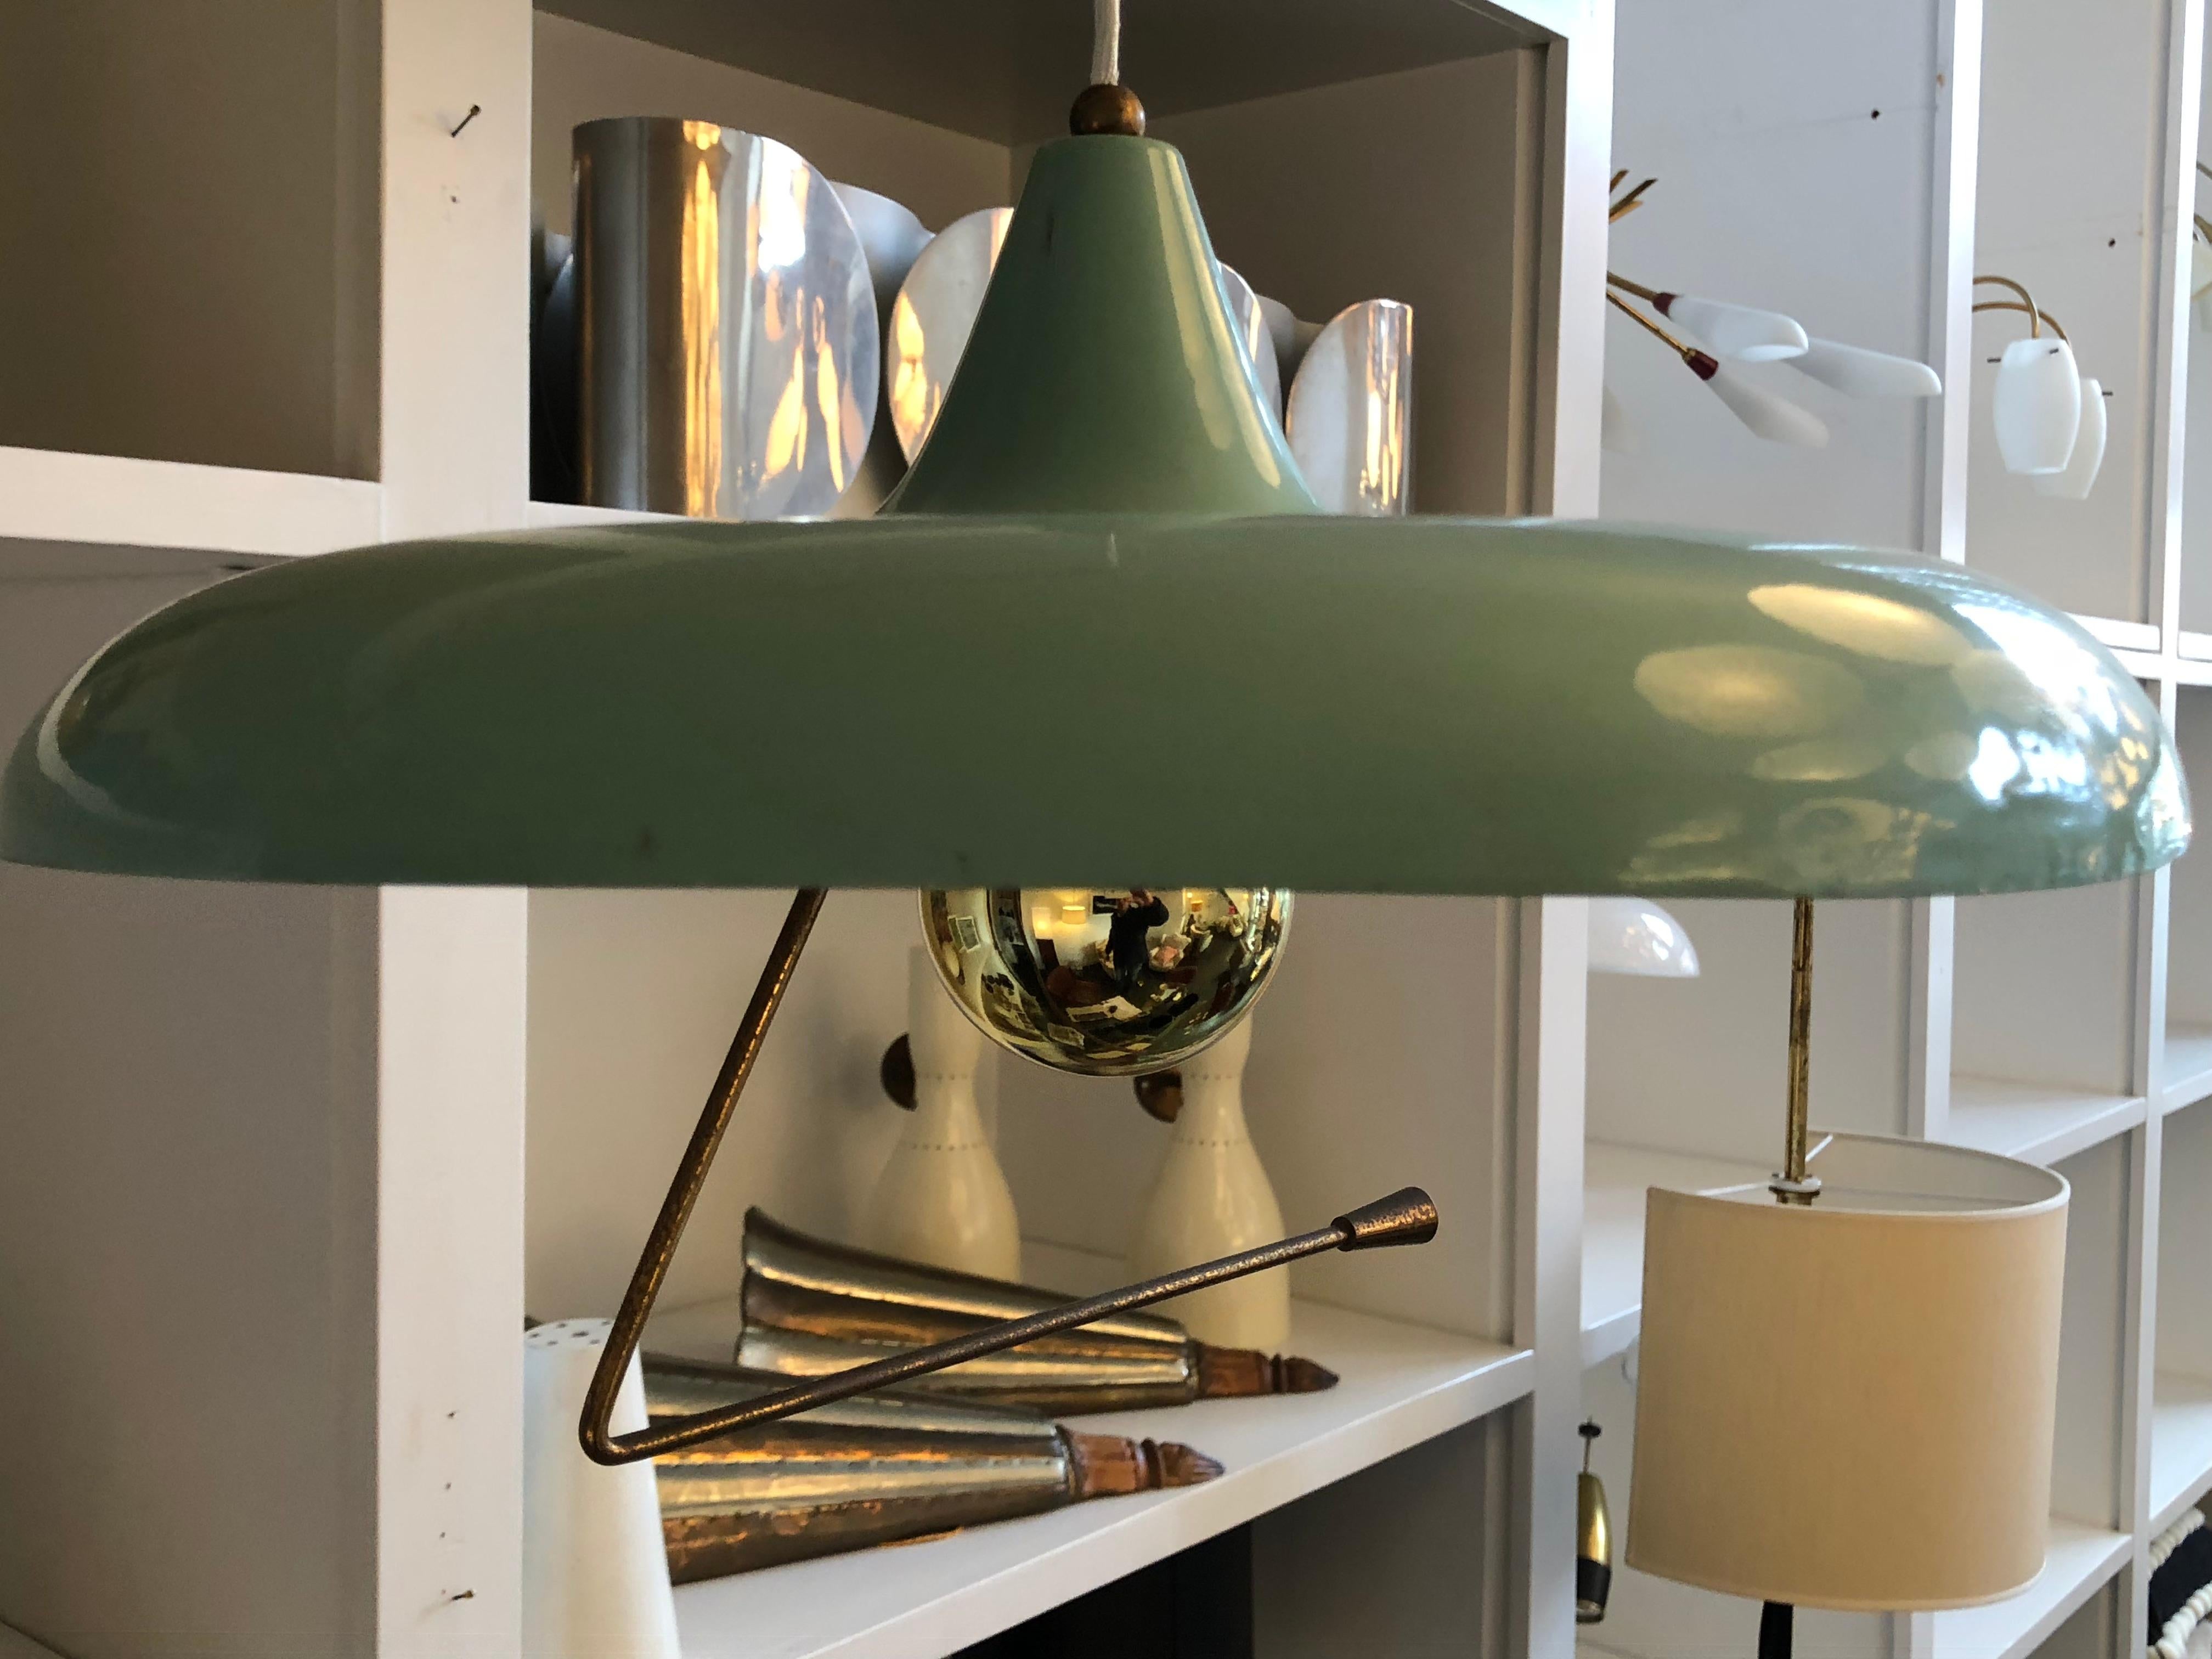 A brass counter-weight wall light by Stilnovo with telescopic (adjustable) arm that swivels 180 degrees. Can be mounted at any height. Metal Saucer pendant is also adjustable. Very flexible design. Has been rewired with step on floor switch, circa